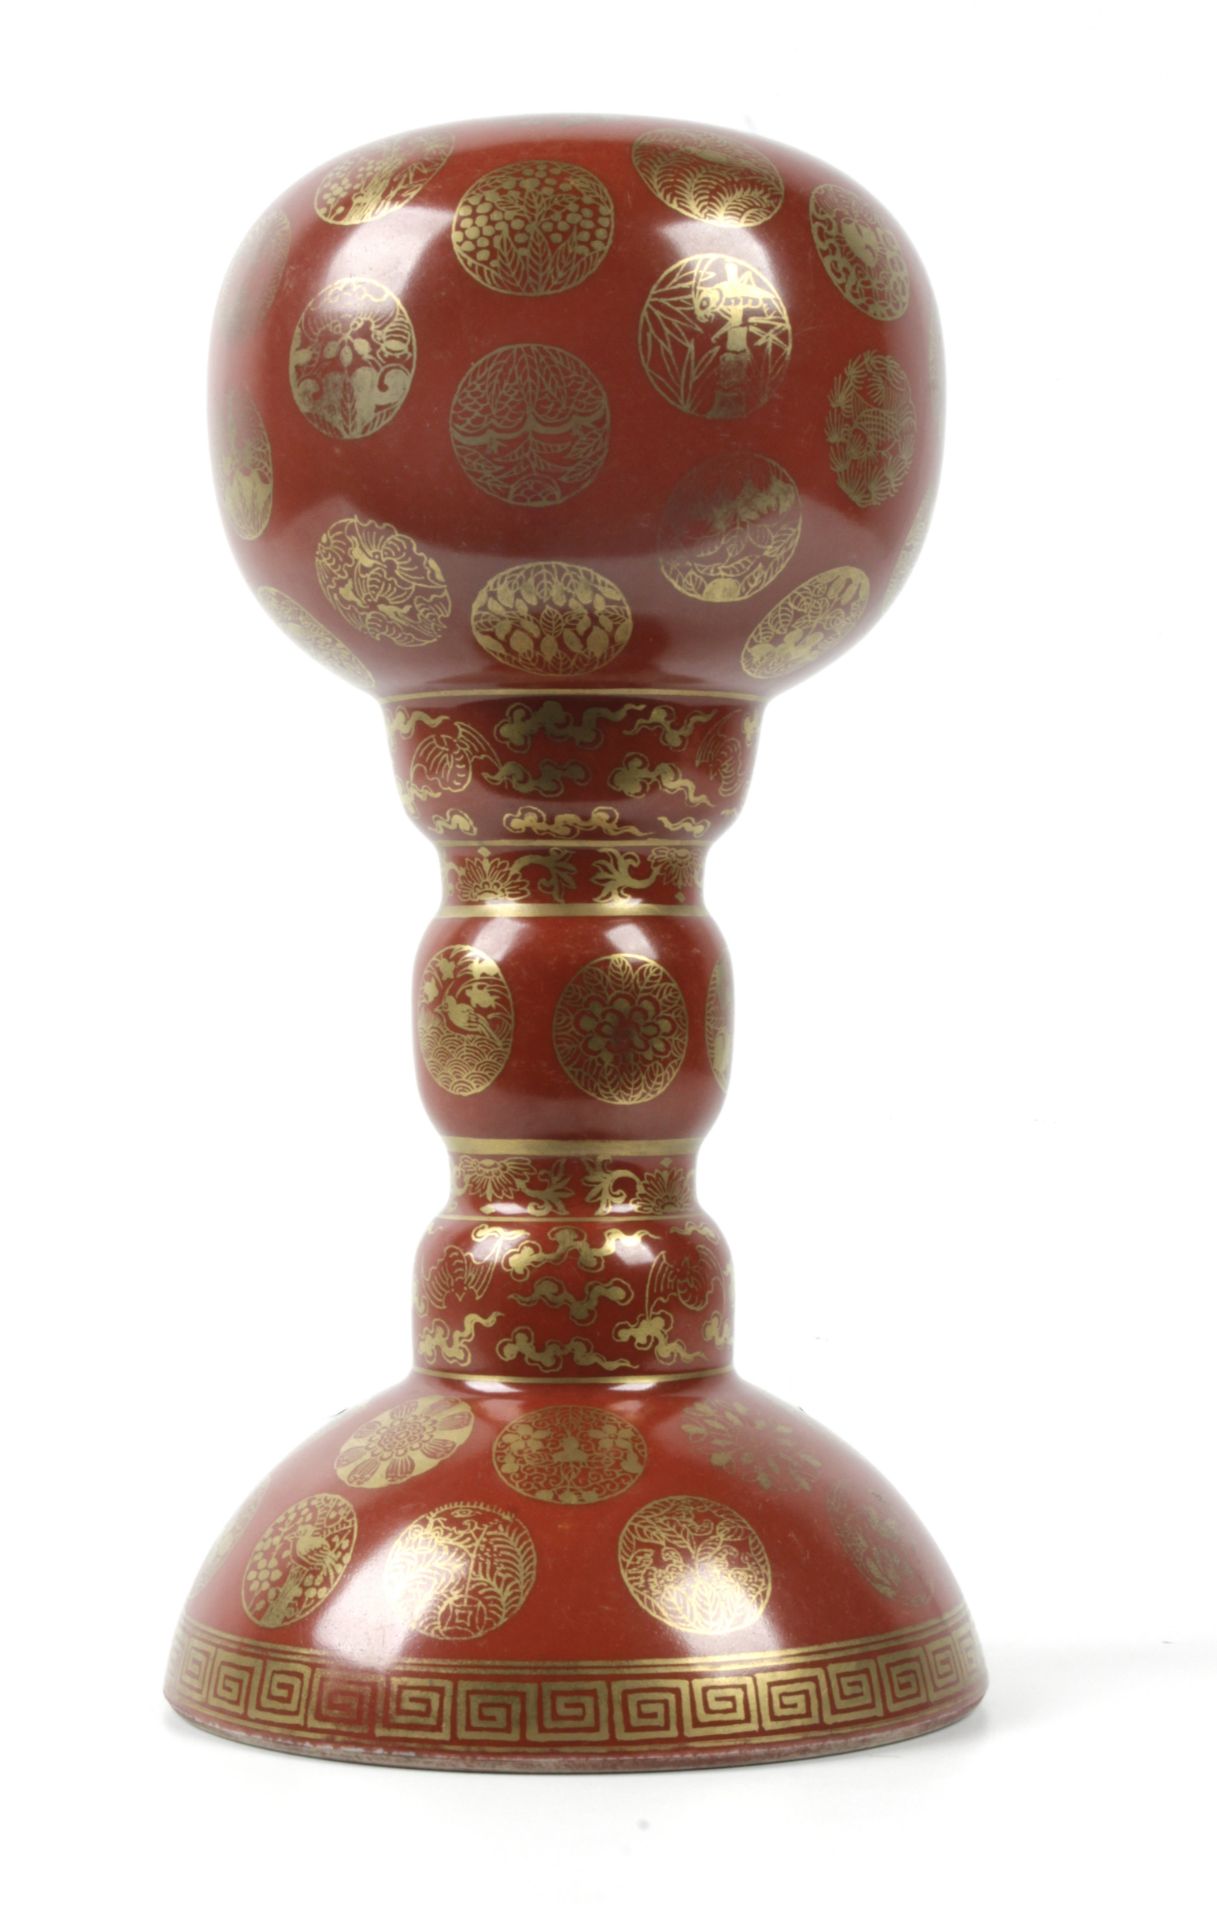 A 20th century Chinese porcelain wig stand